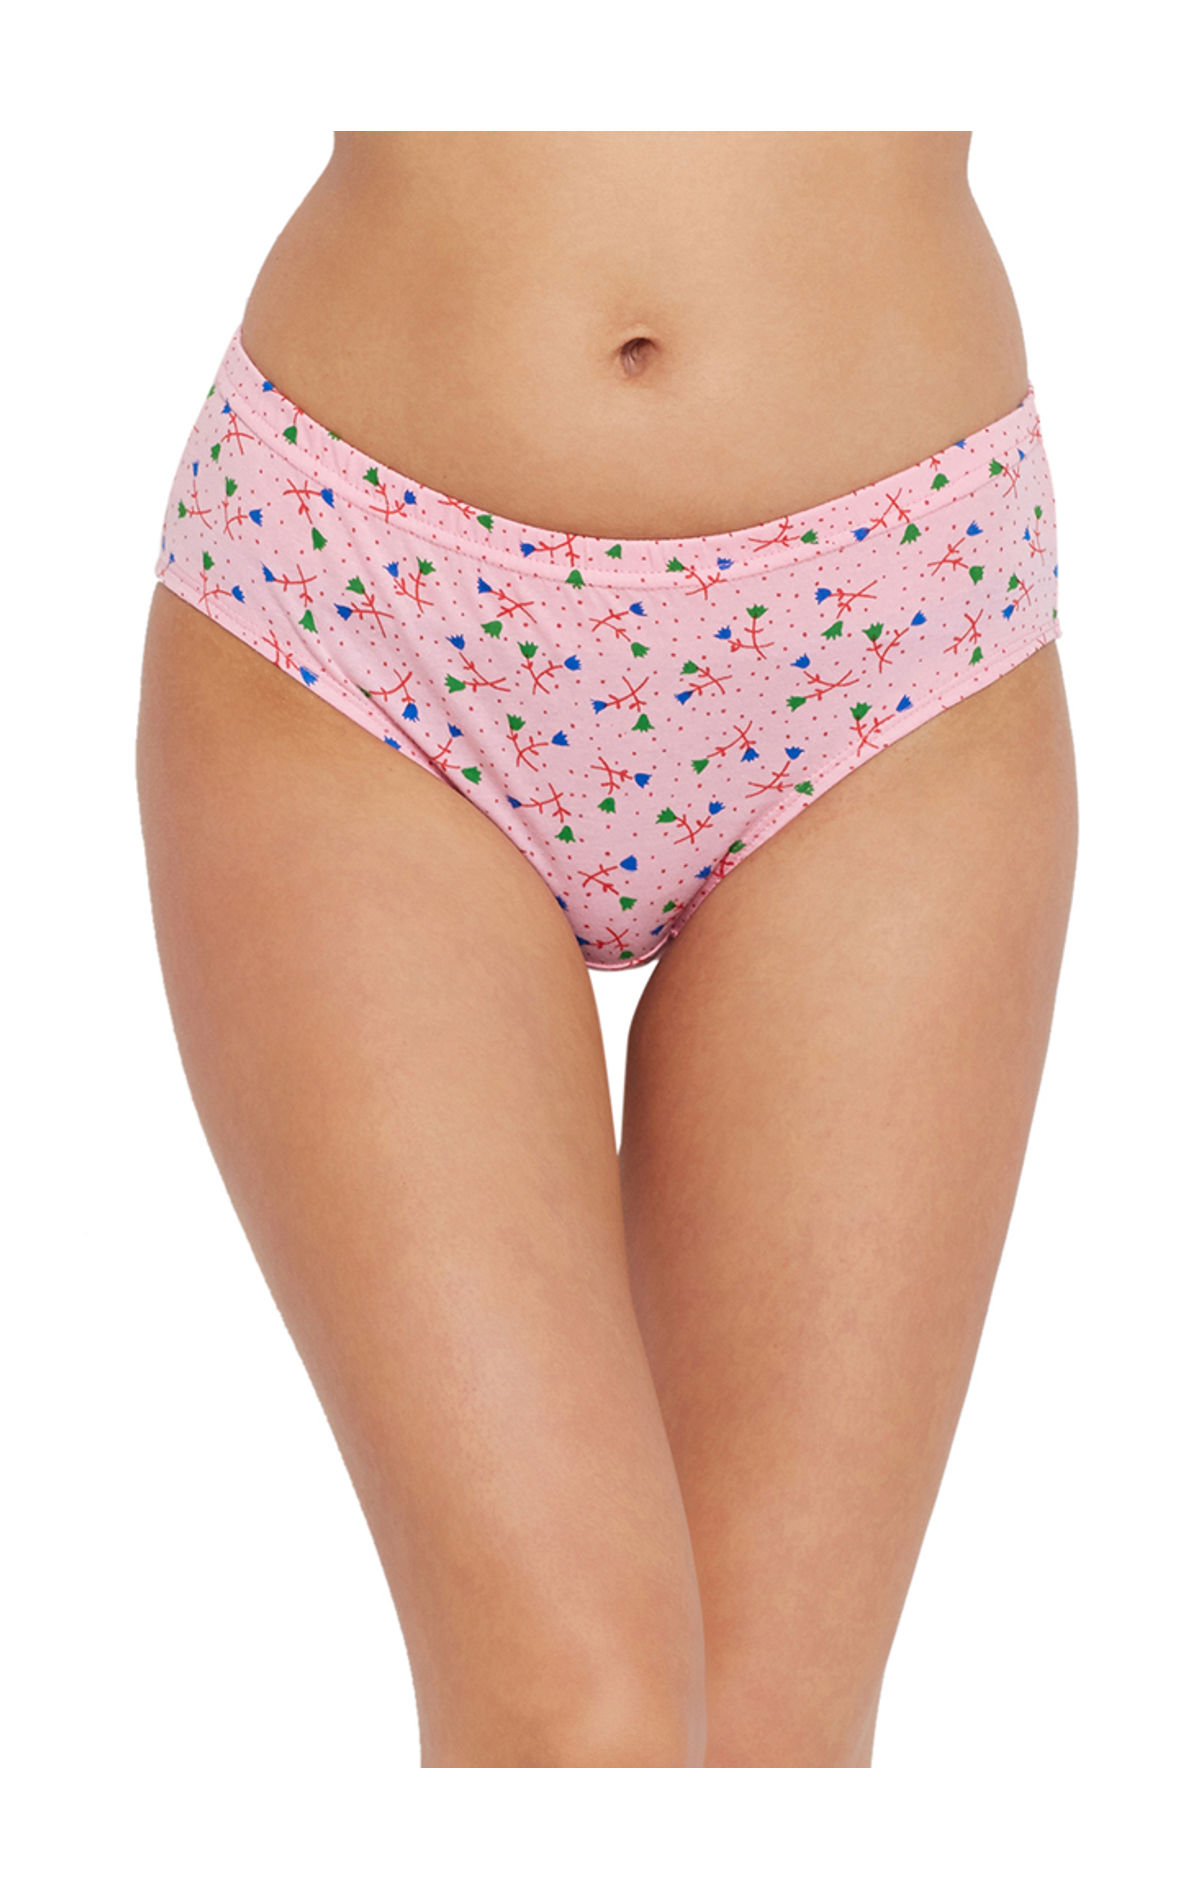 Printed Ladies Cotton Floral Print Panty, Size: S-XXL at Rs 35